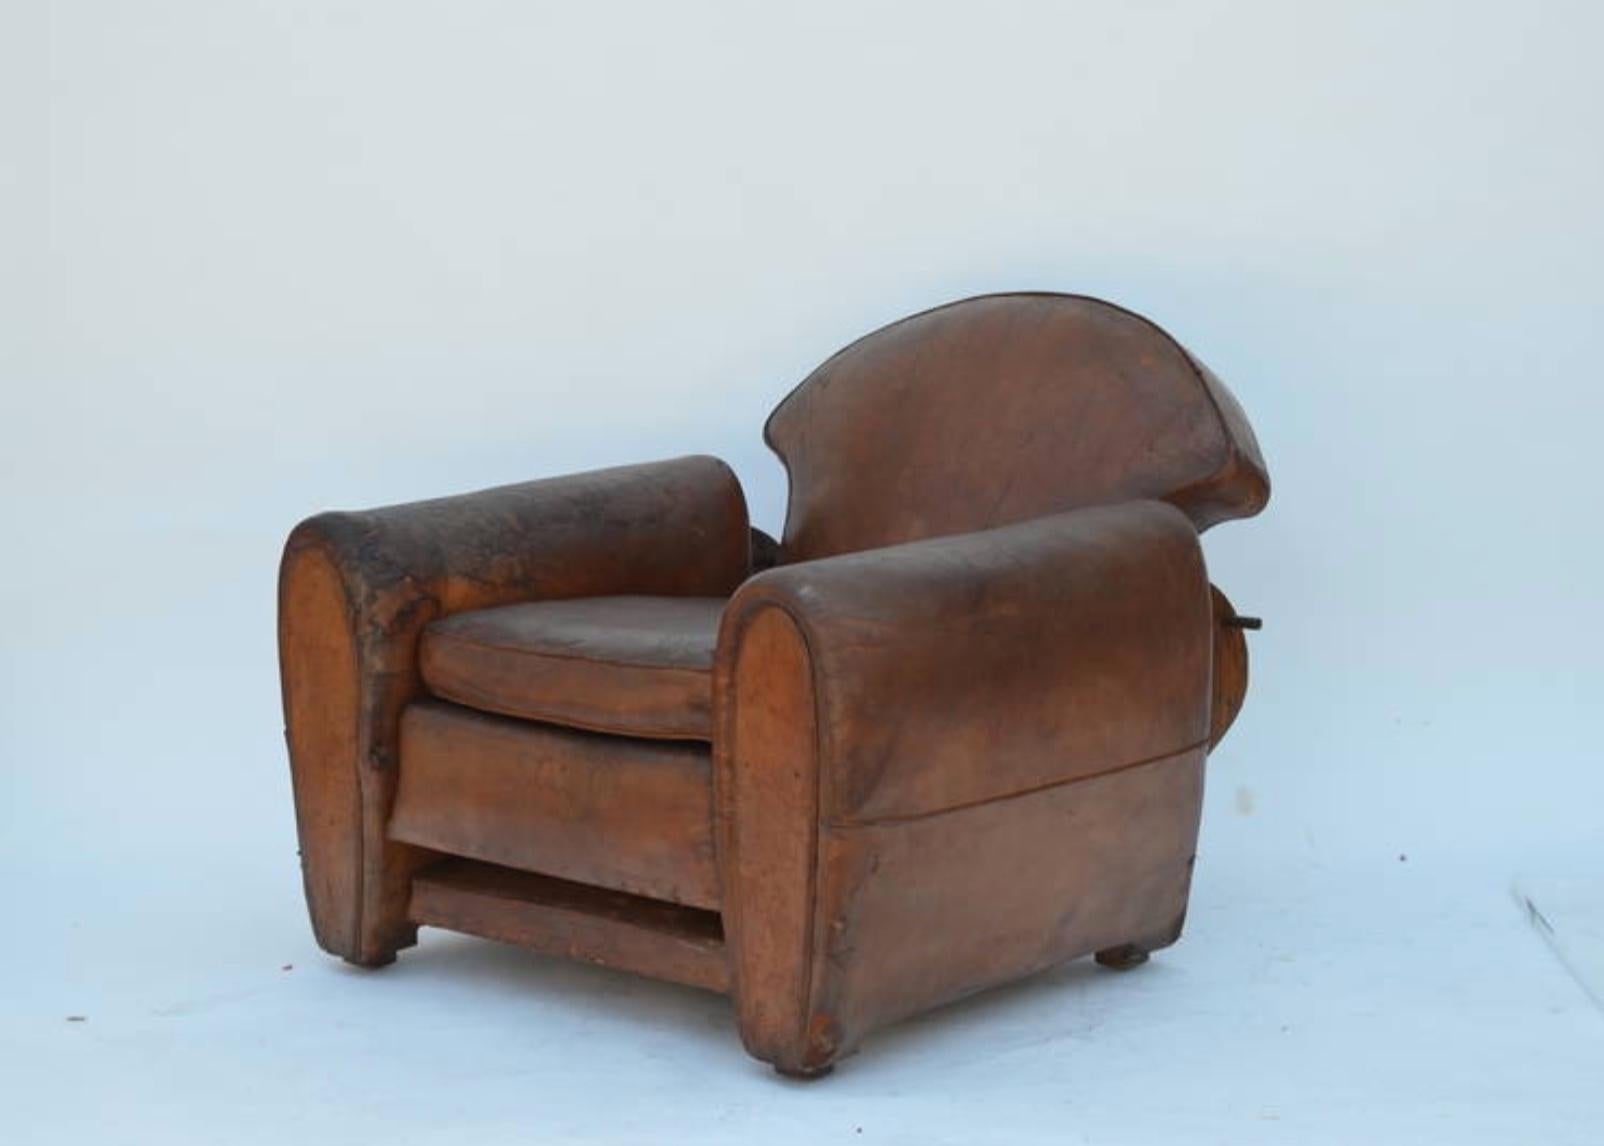 Exceptional Aged Leather French Art Deco Adjustable Club Chair For Sale 3